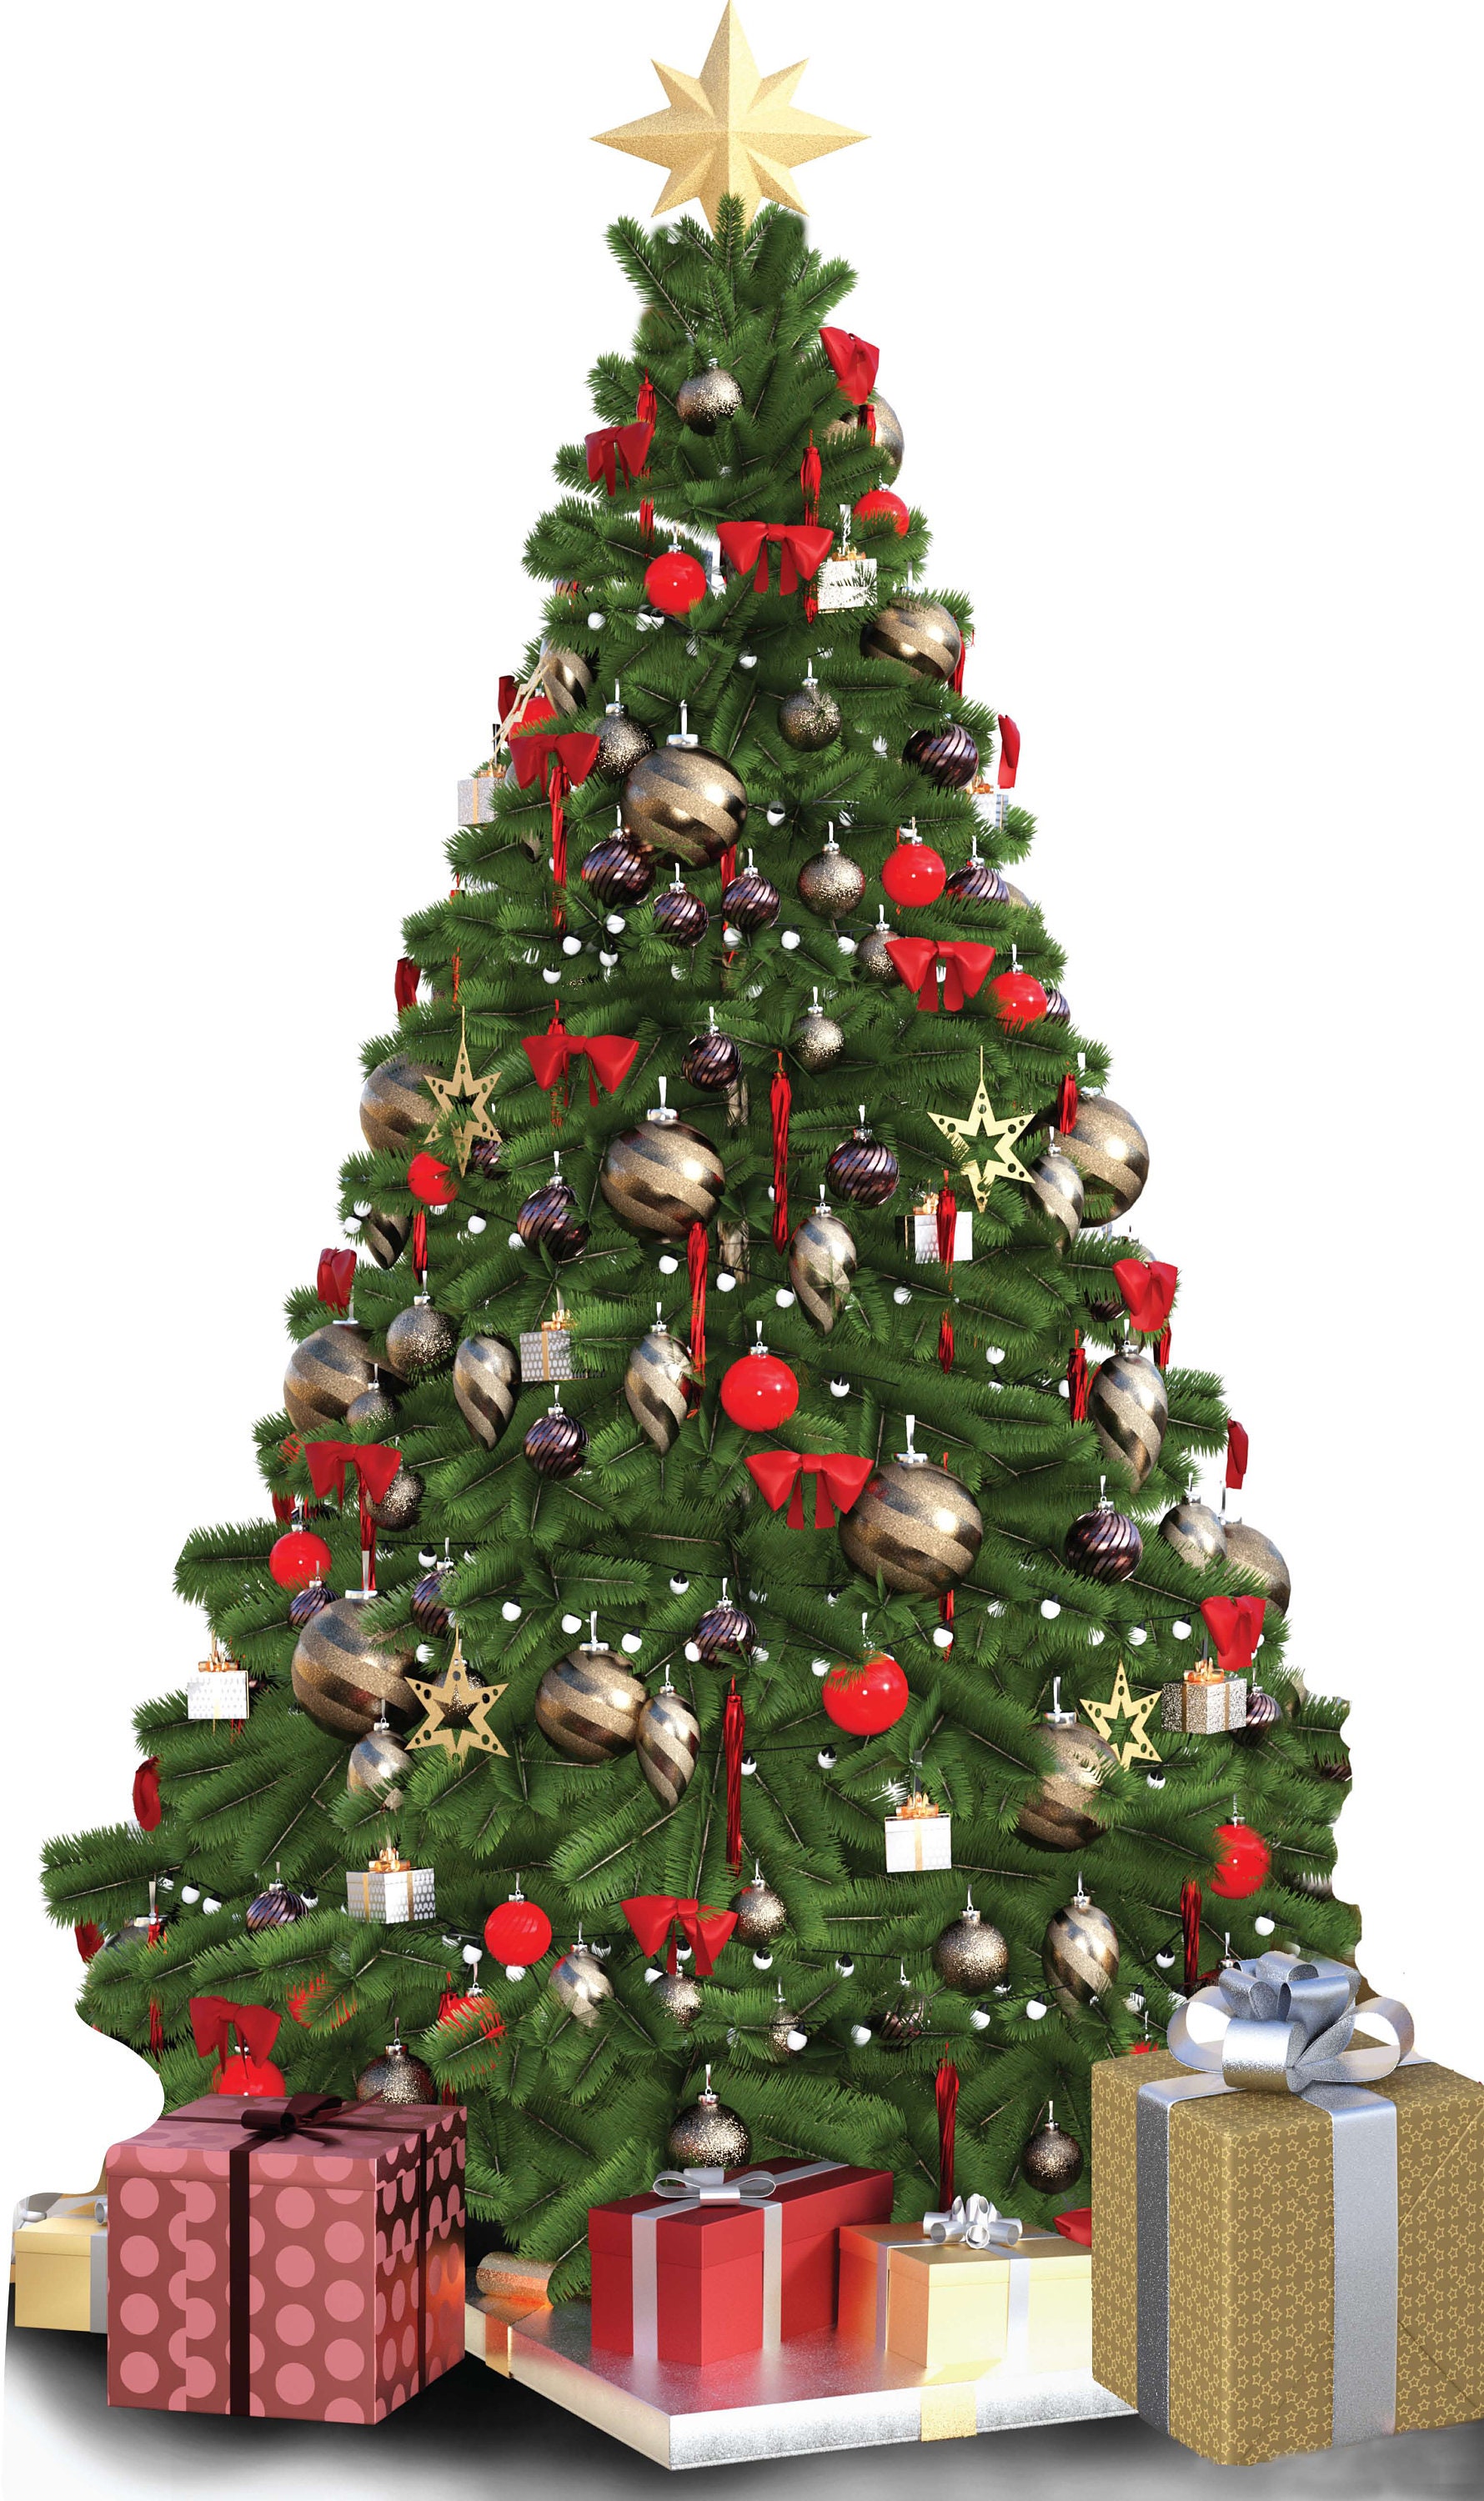 Christmas: Decorating The Christmas Tree Life-Size Cutout - Stand Out 44W x 51H